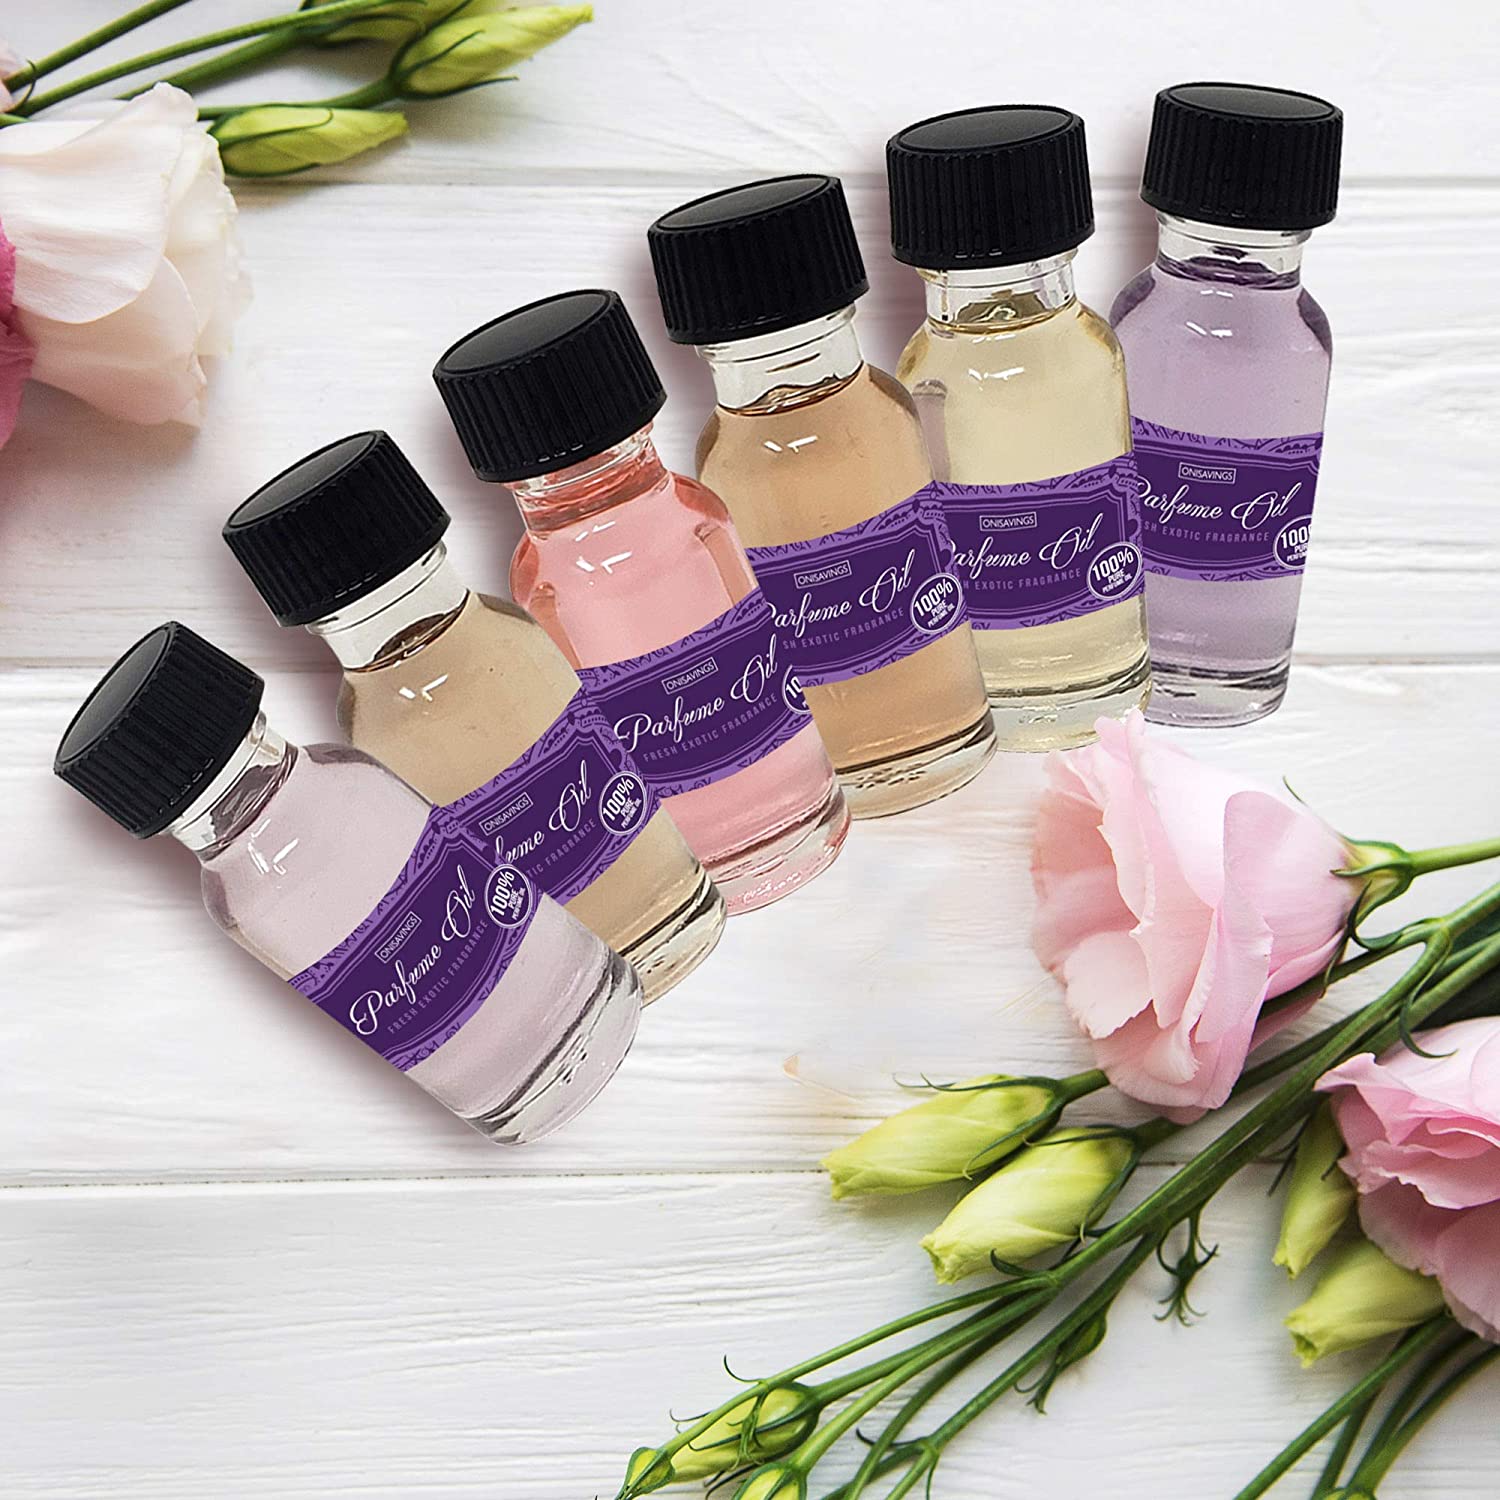 8 Best Scented Perfume Oils for 2019 - Roll-On Fragrance Oils